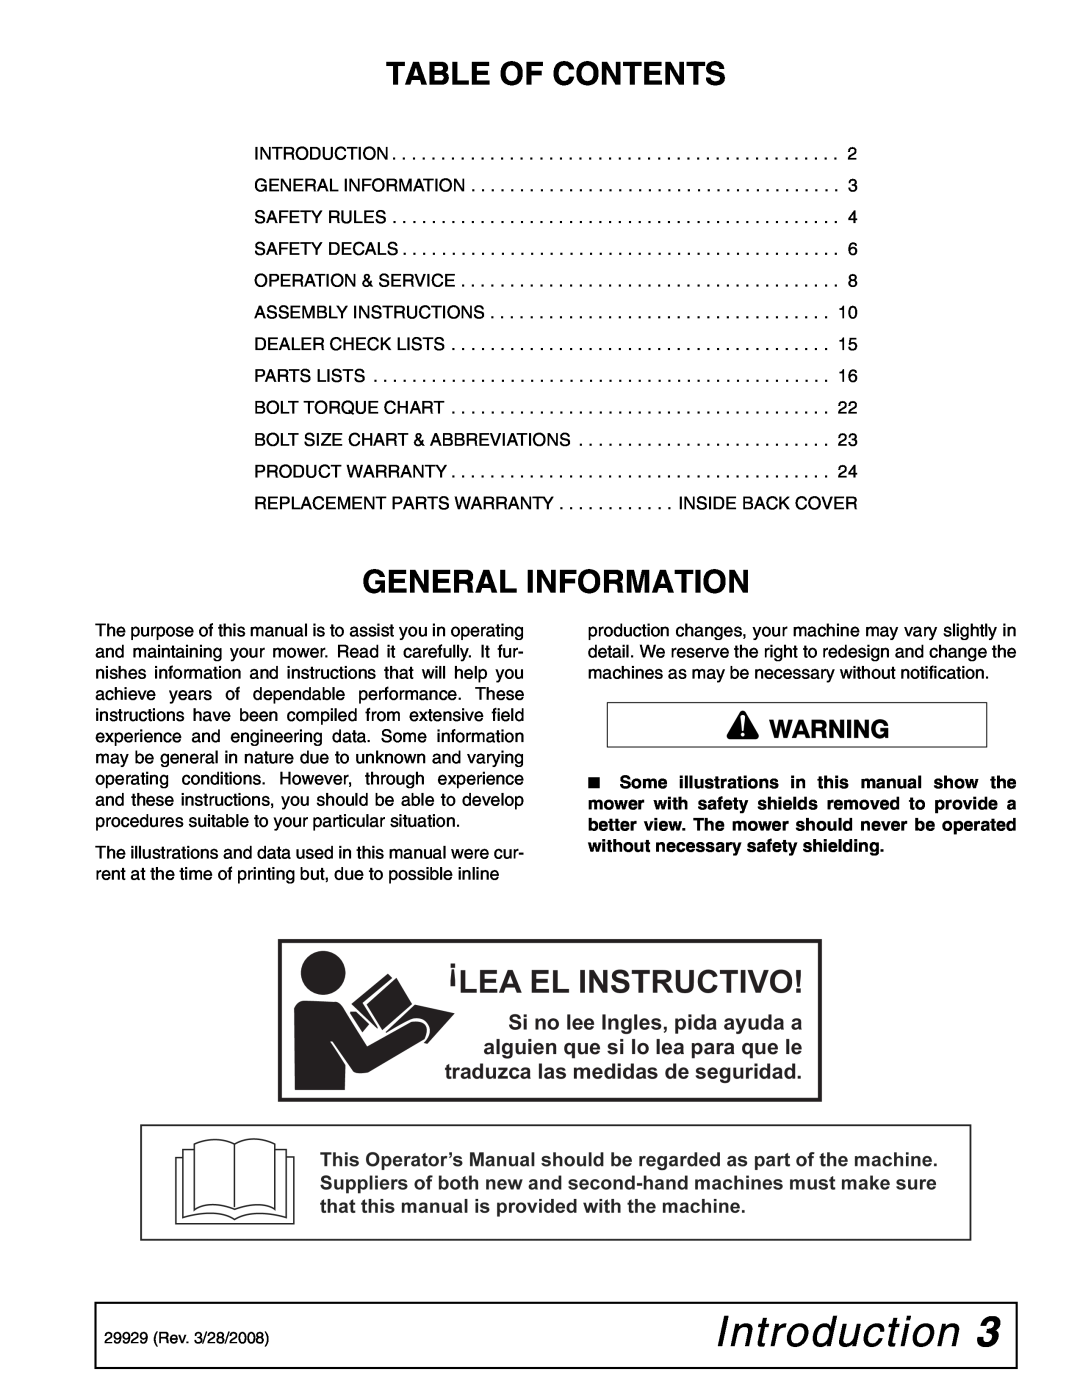 Woods Equipment 59CL-4, 59CLF-4 manual Introduction, Table Of Contents, General Information, Lea El Instructivo 